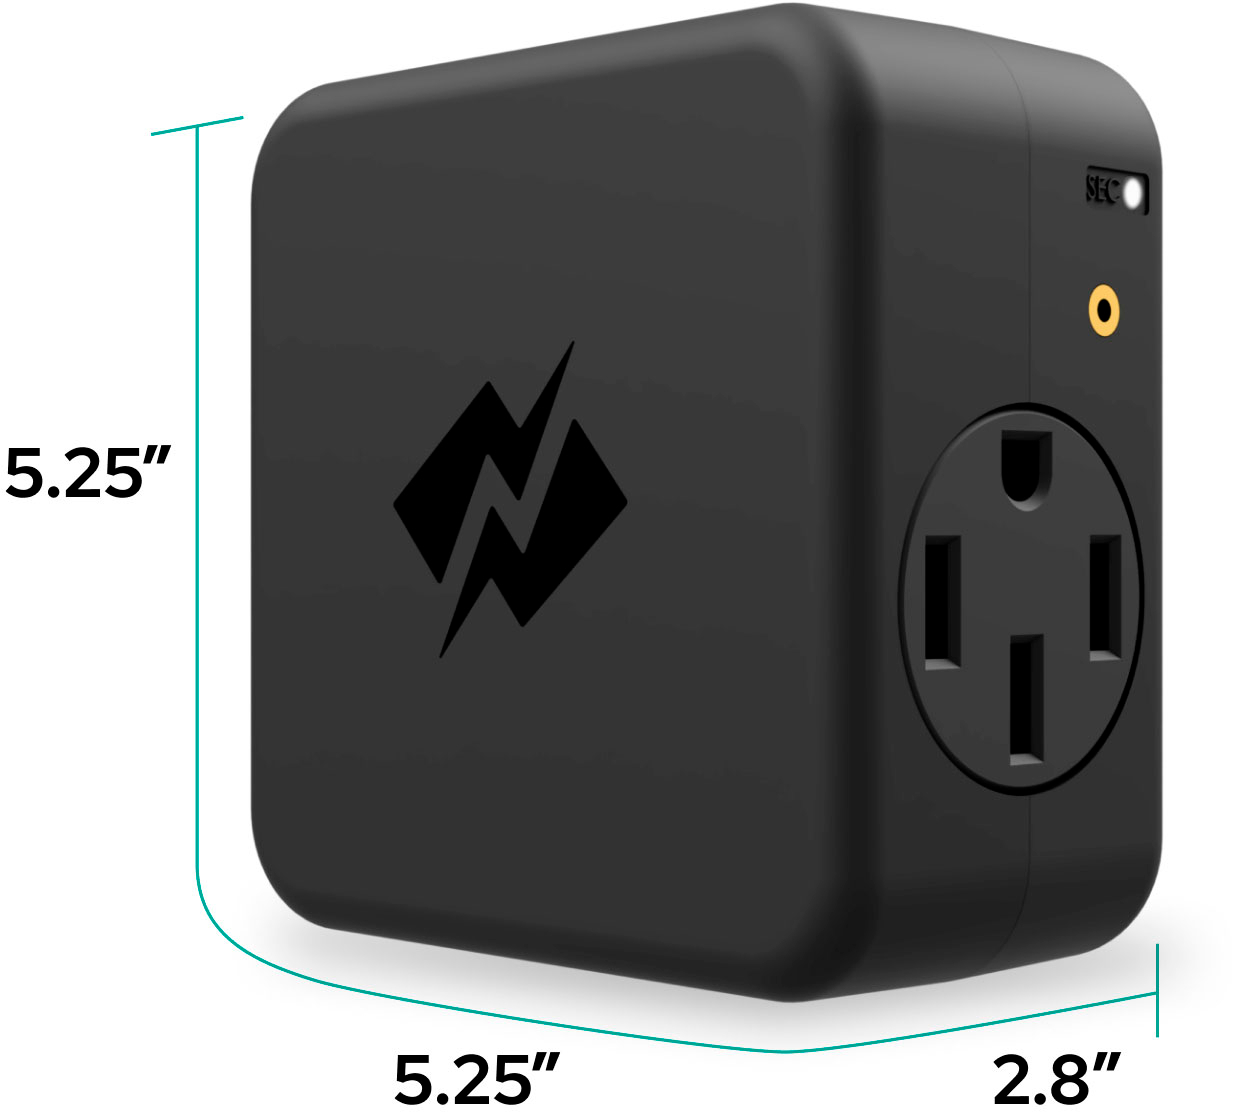 Wallbox Cable Pulsar Plus J1772 Level 2 Hardwired Electric Vehicle (EV)  Charger up to 48A 25' Black PUP1-U-1-6-C-002 - Best Buy